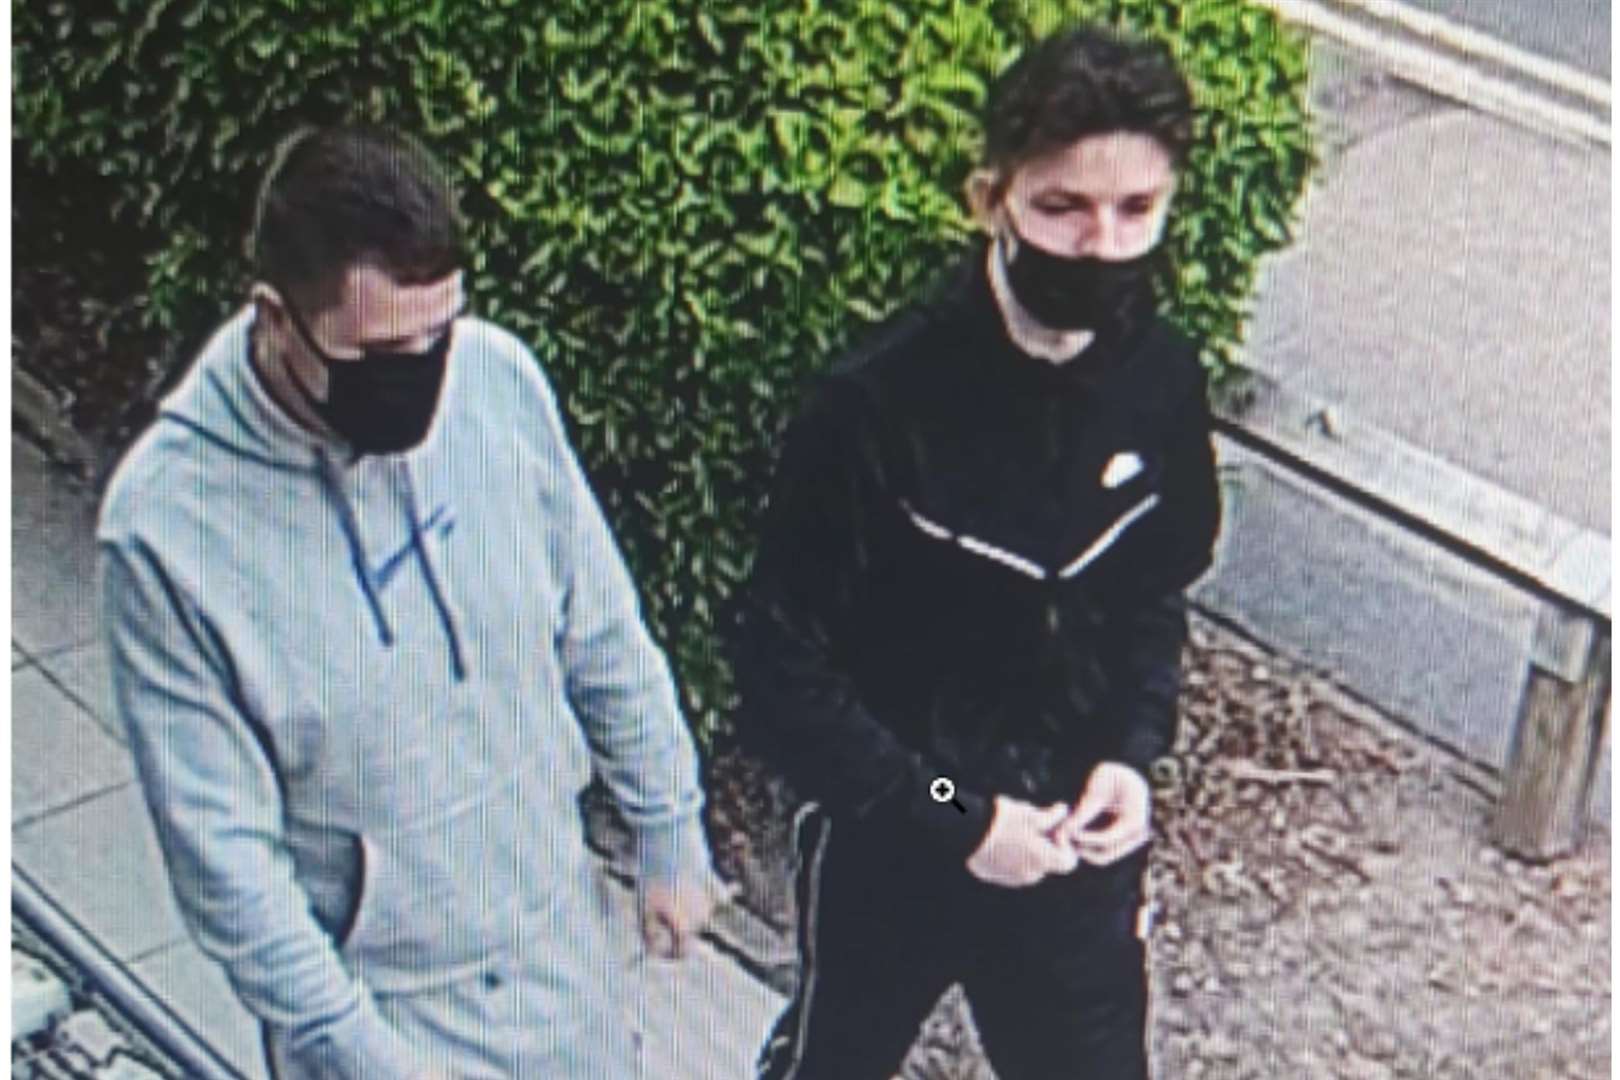 Police would like to speak to these two men. Photo: Kent Police